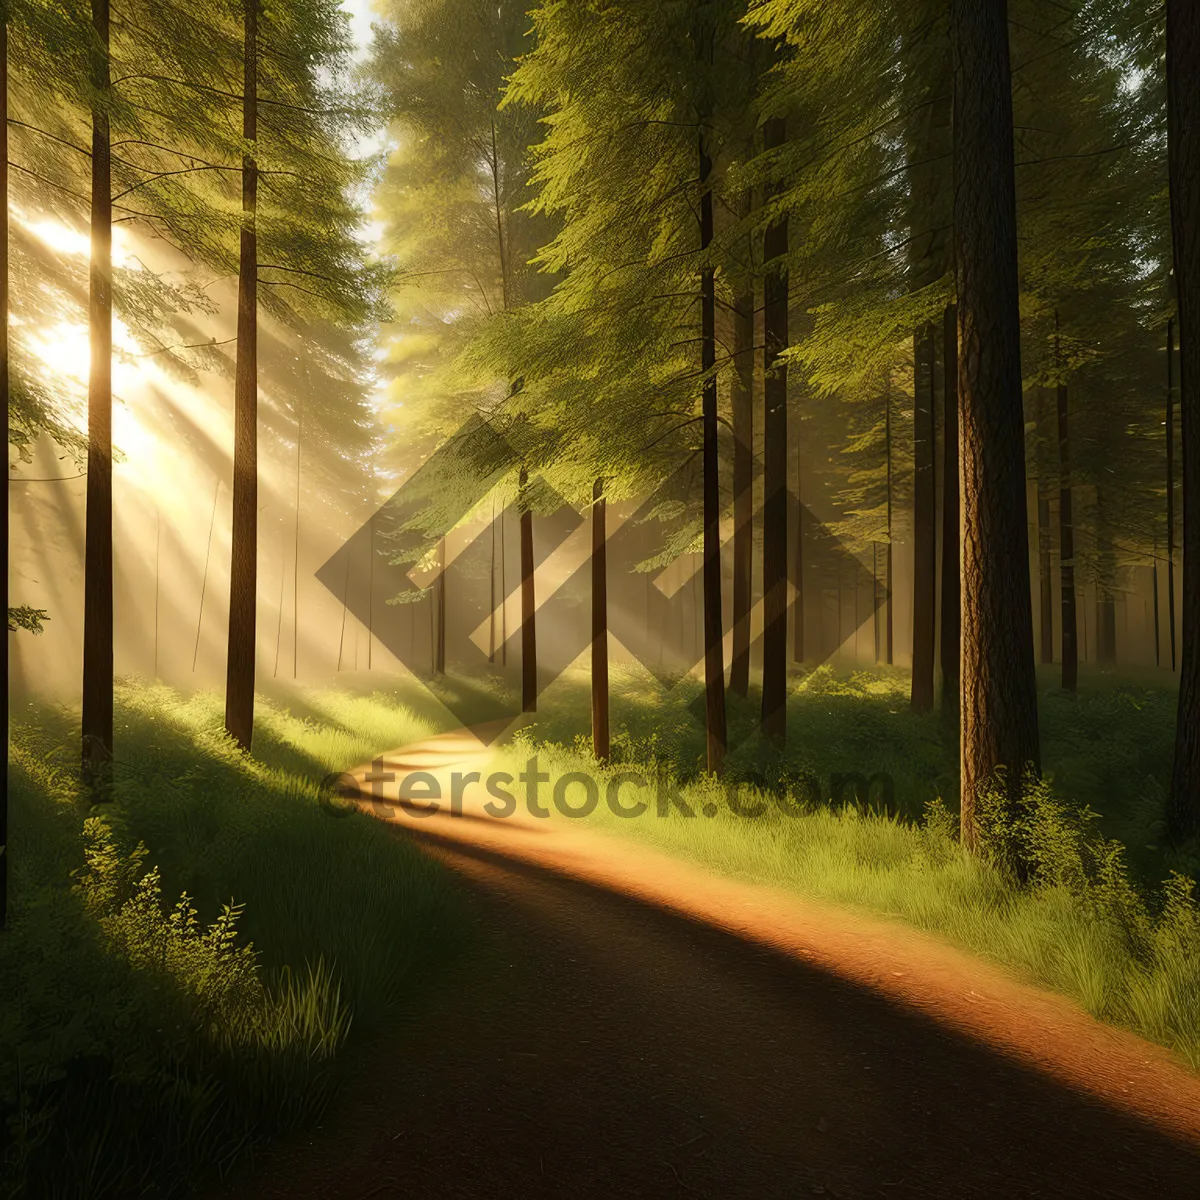 Picture of Sunlit Path Through Autumn Forest